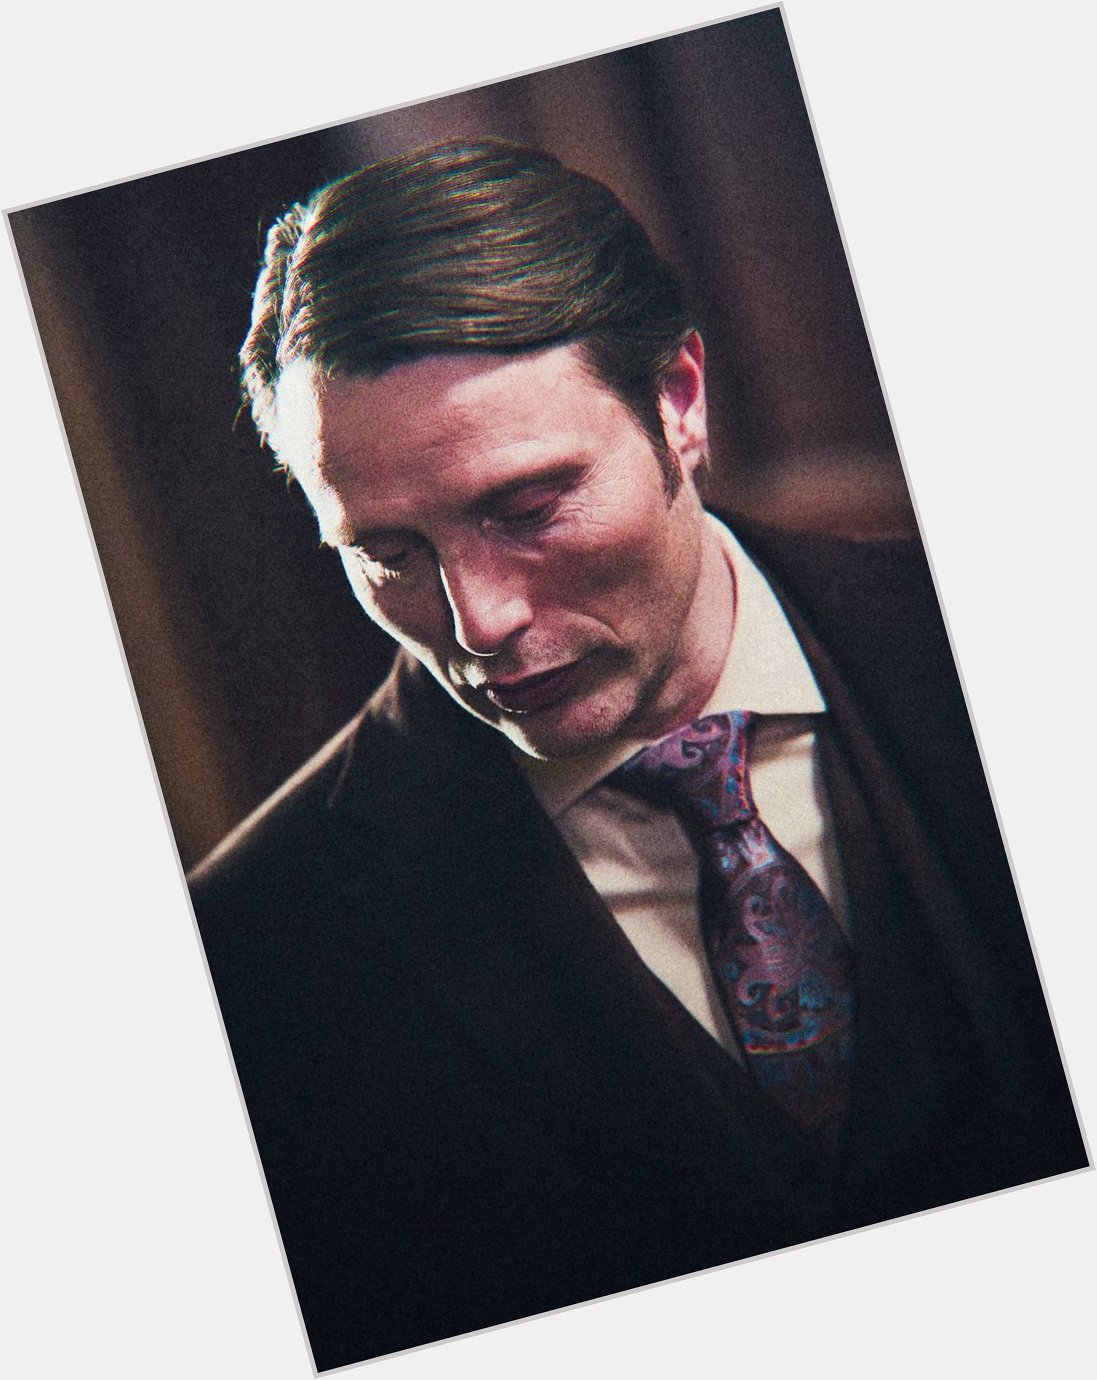 Happy birthday to the legend himself, mads mikkelsen  . 